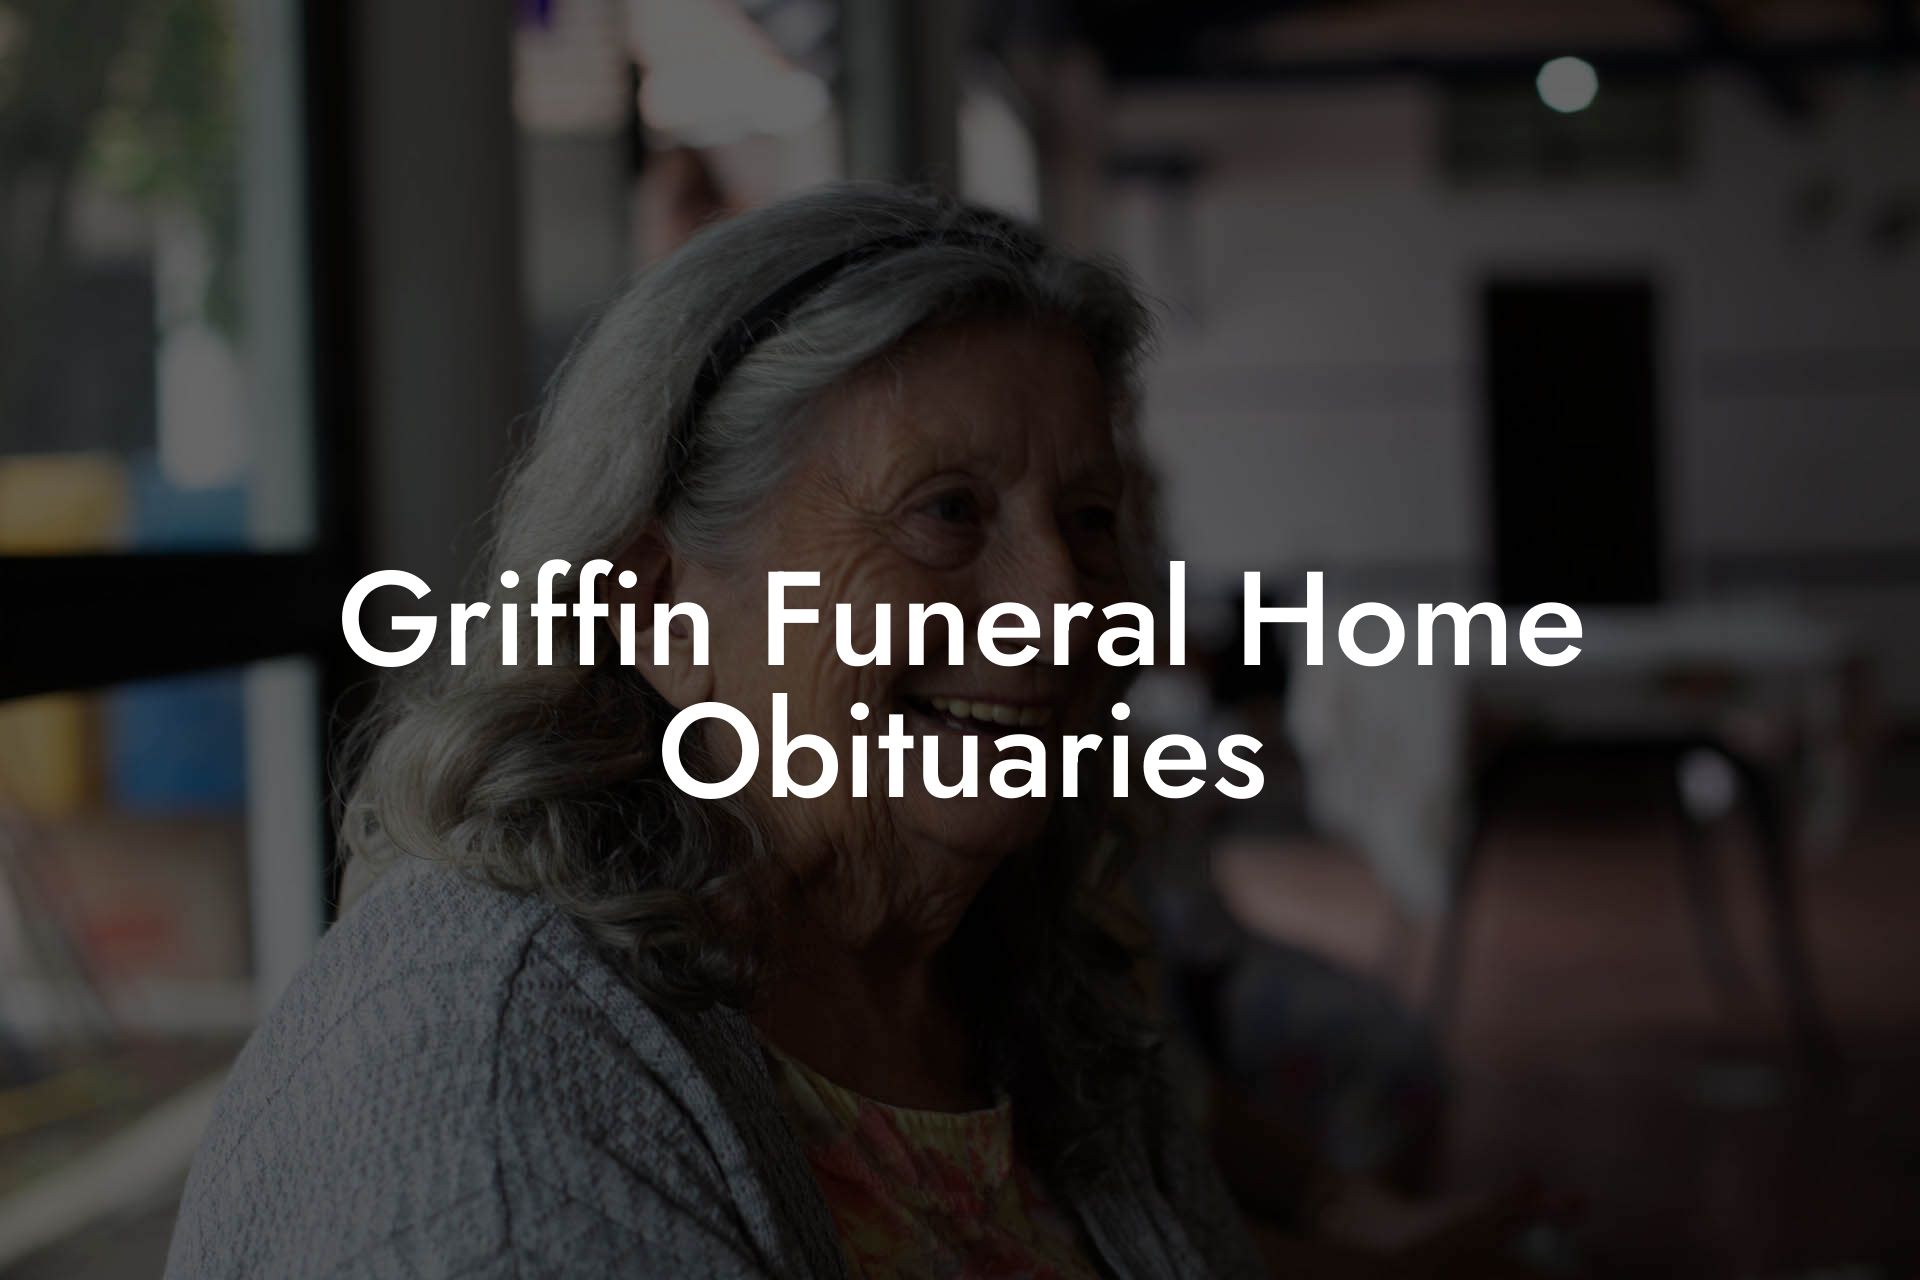 Griffin Funeral Home Obituaries